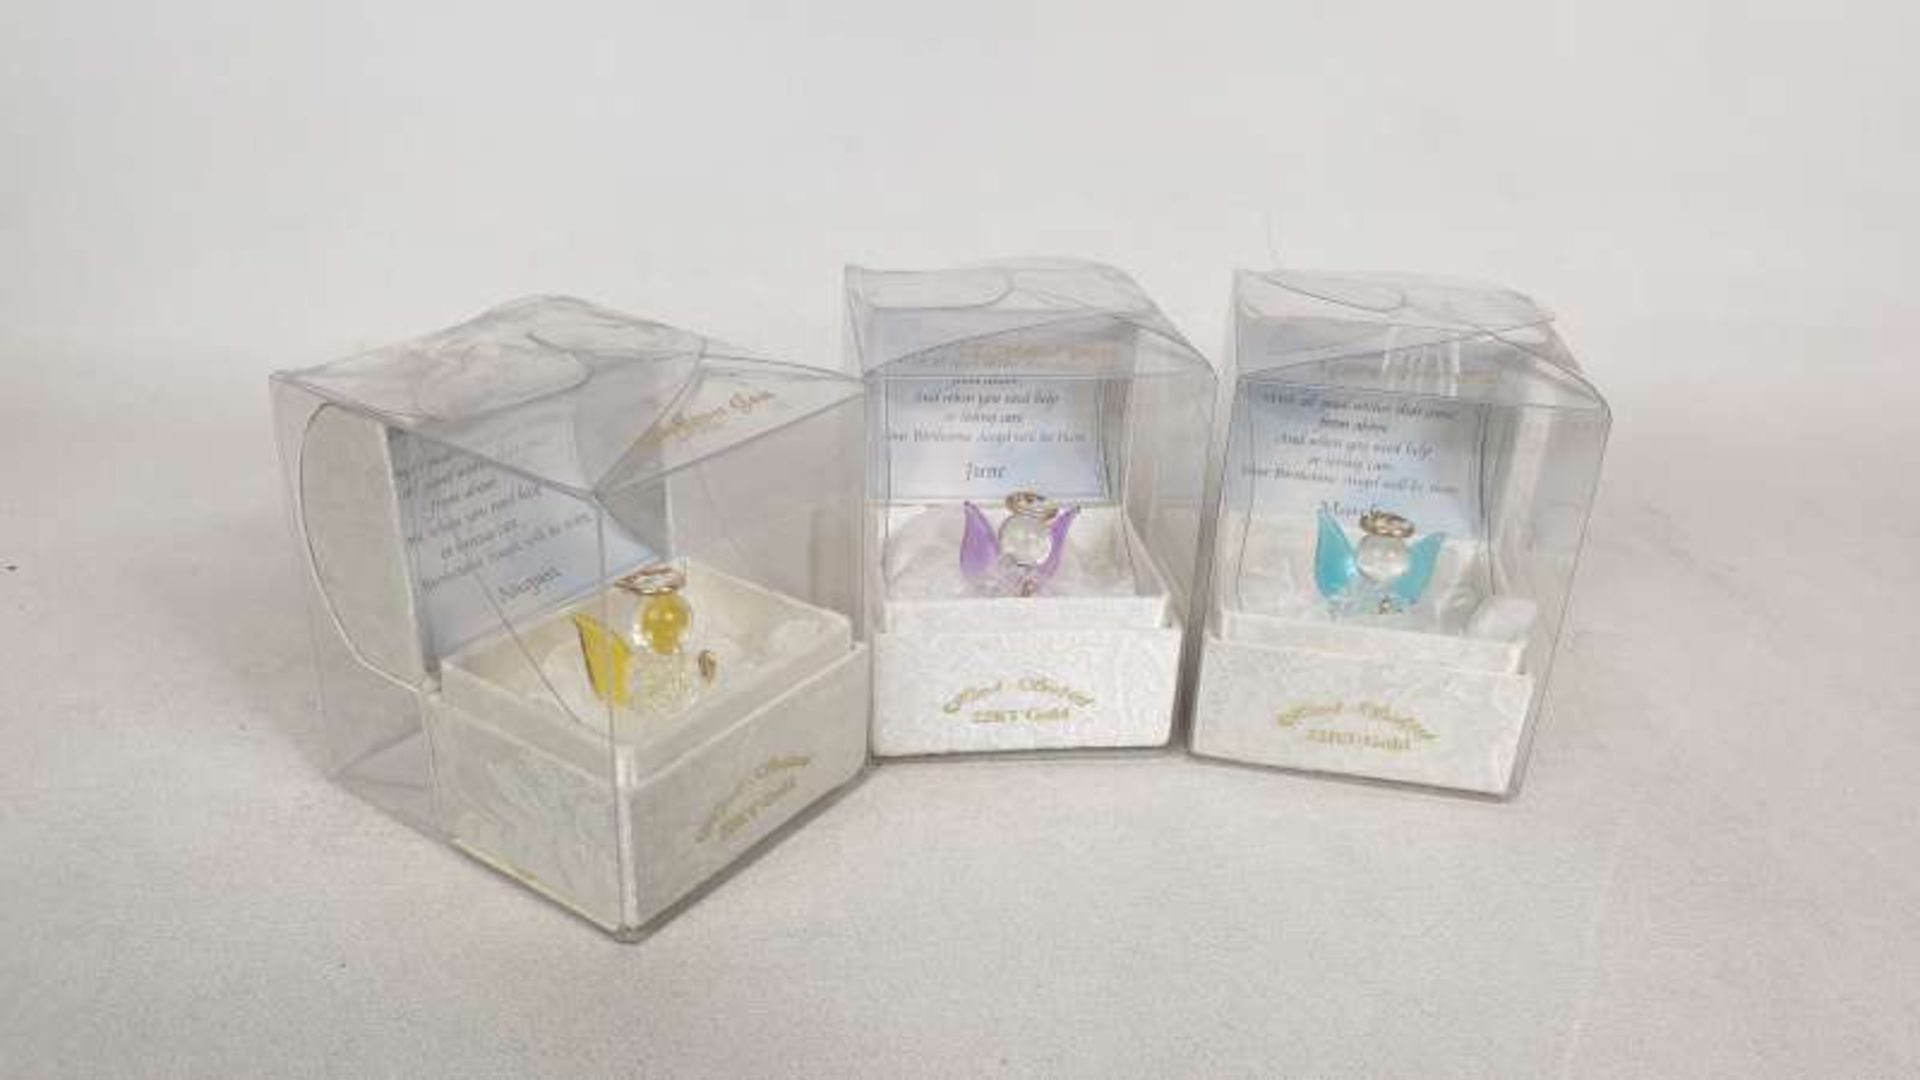 90 X BRAND NEW BOXED HAND SCULPTURED 22KT GOLD BIRTHSTONE ANGELS WITH CERTIFICATION OF